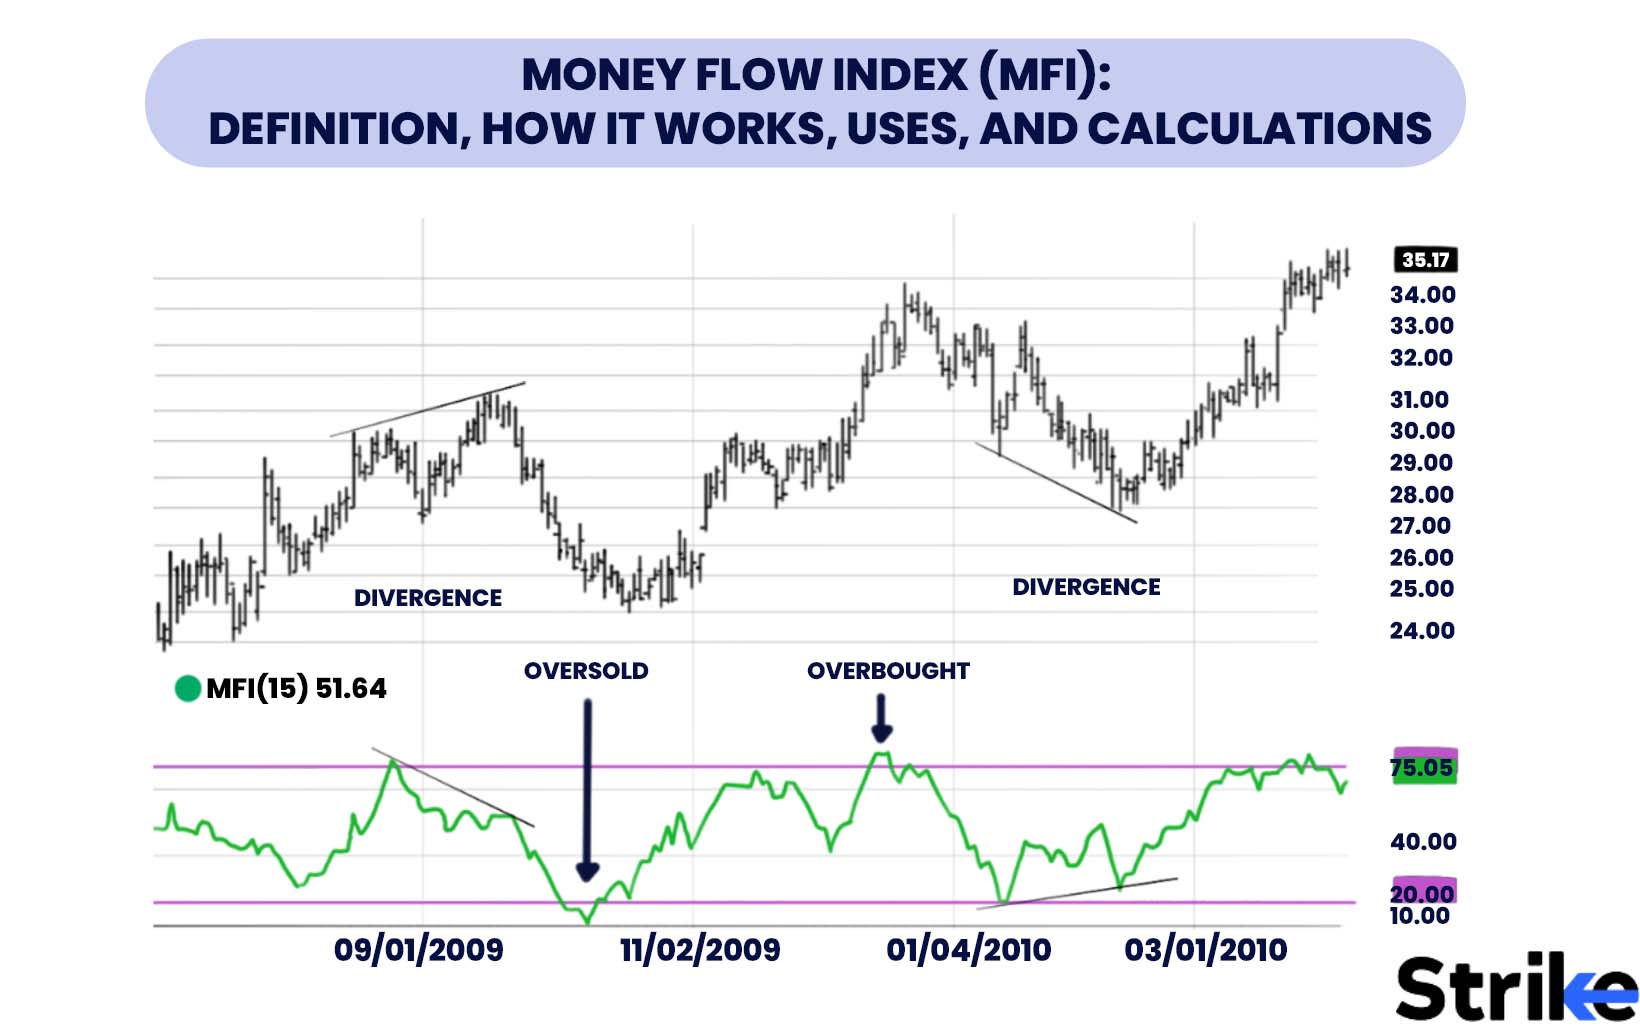 Money Flow Index (MFI): Definition, How it Works, Uses, and Calculations